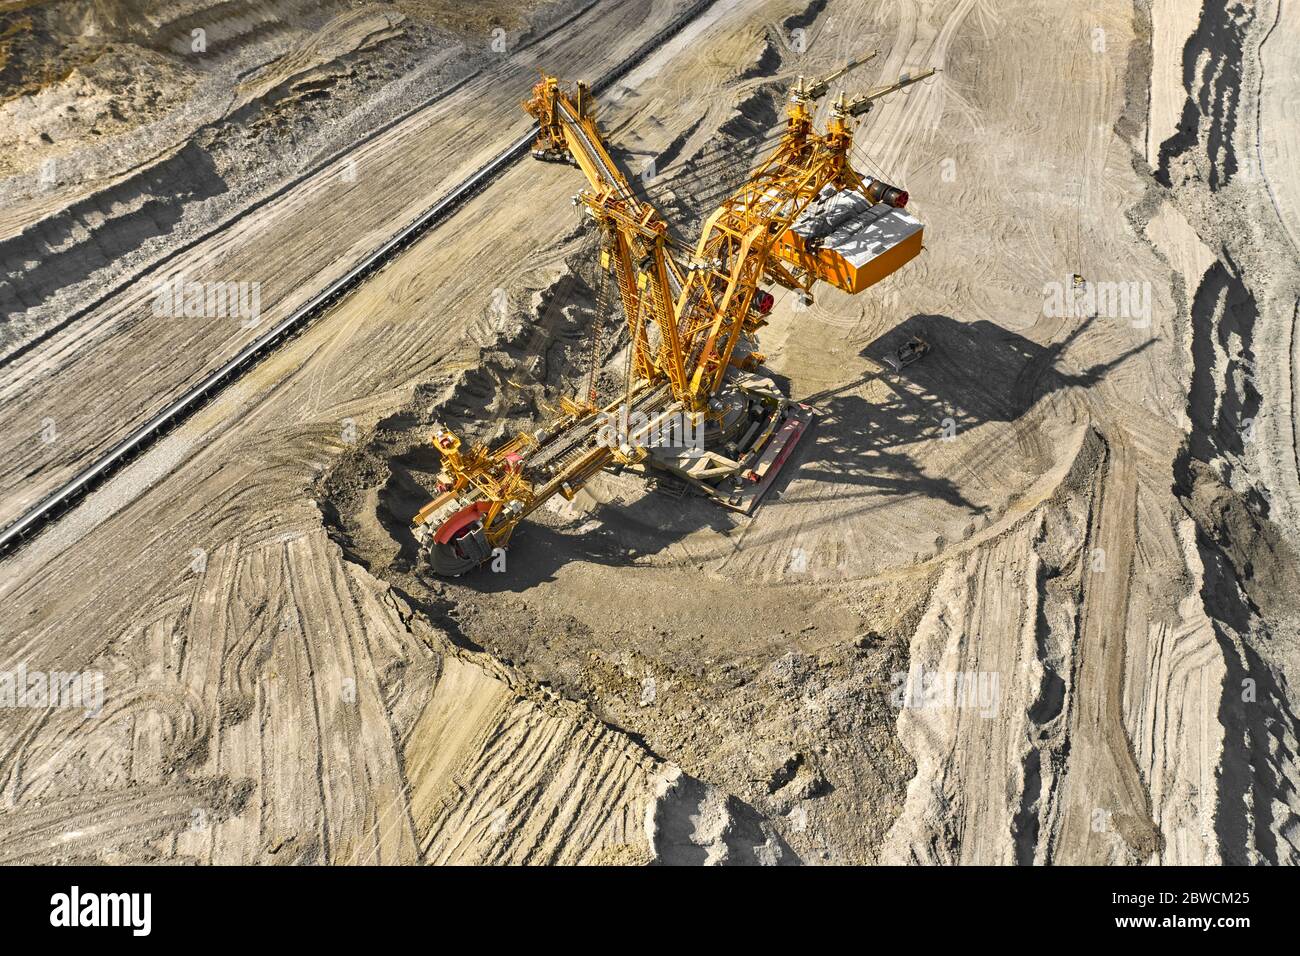 Bucket-wheel excavator for surface mining in a lignite quarry, Heavy industry.  Stock Photo